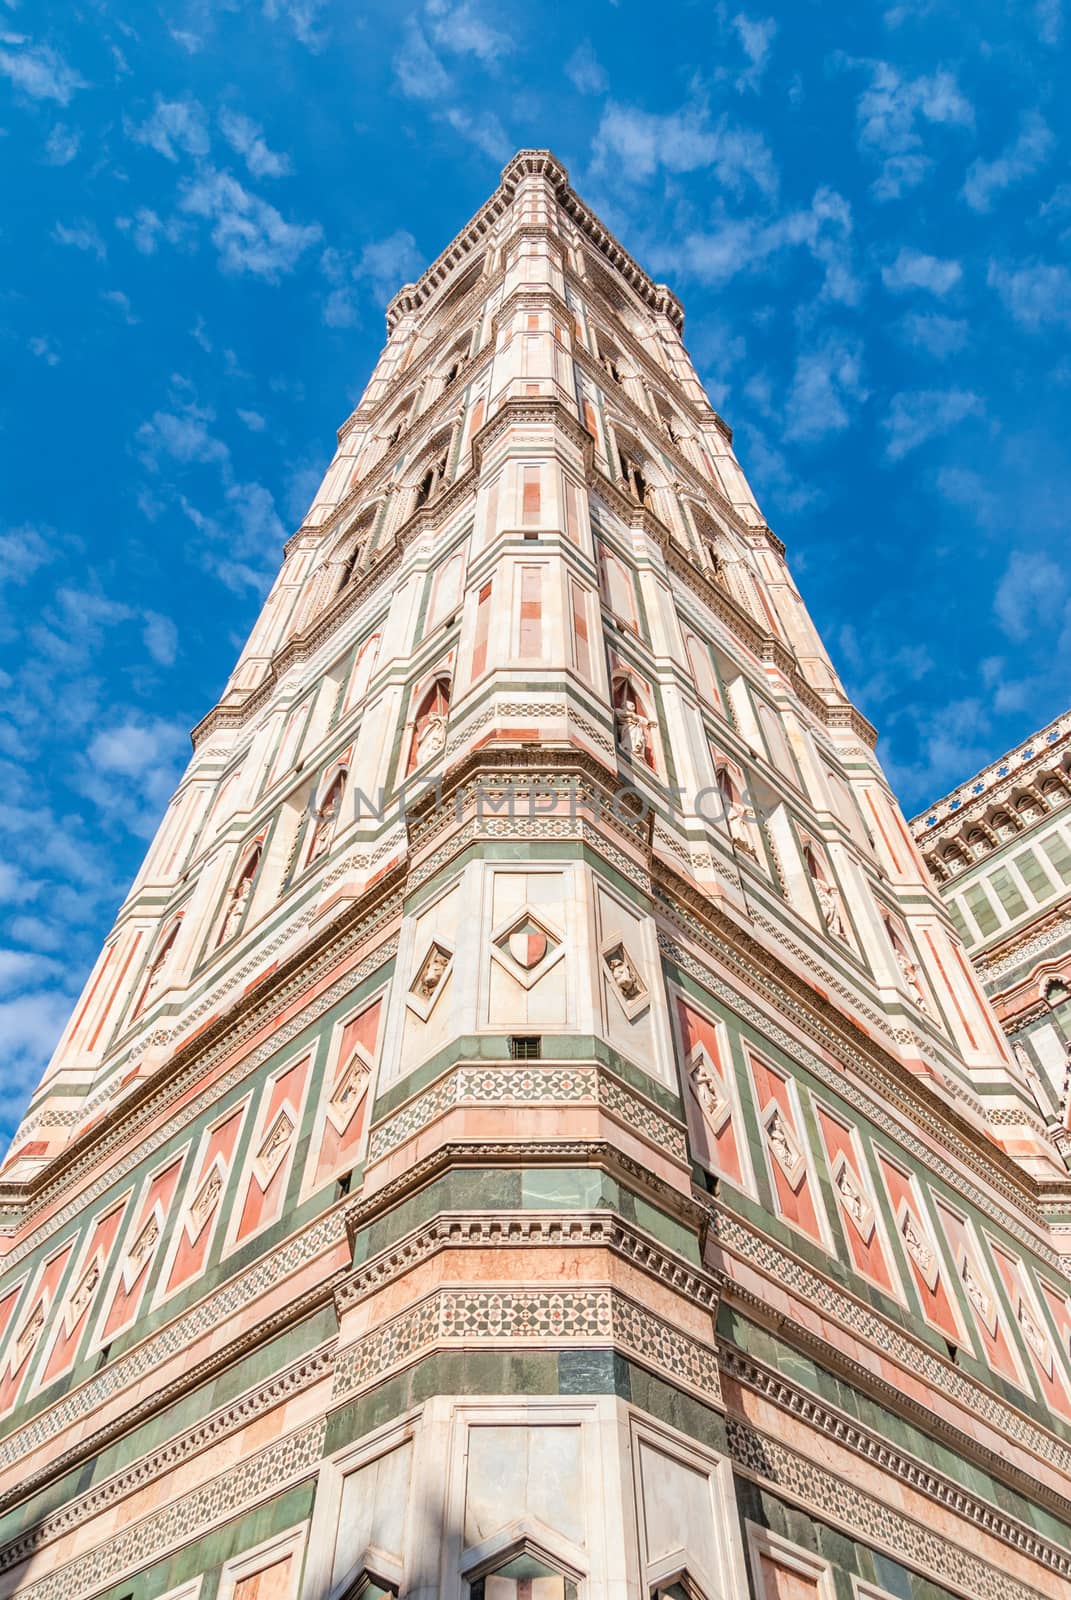 Giotto's Campanile historical Old Town of FlorenceTuscany, Italy. by Zhukow